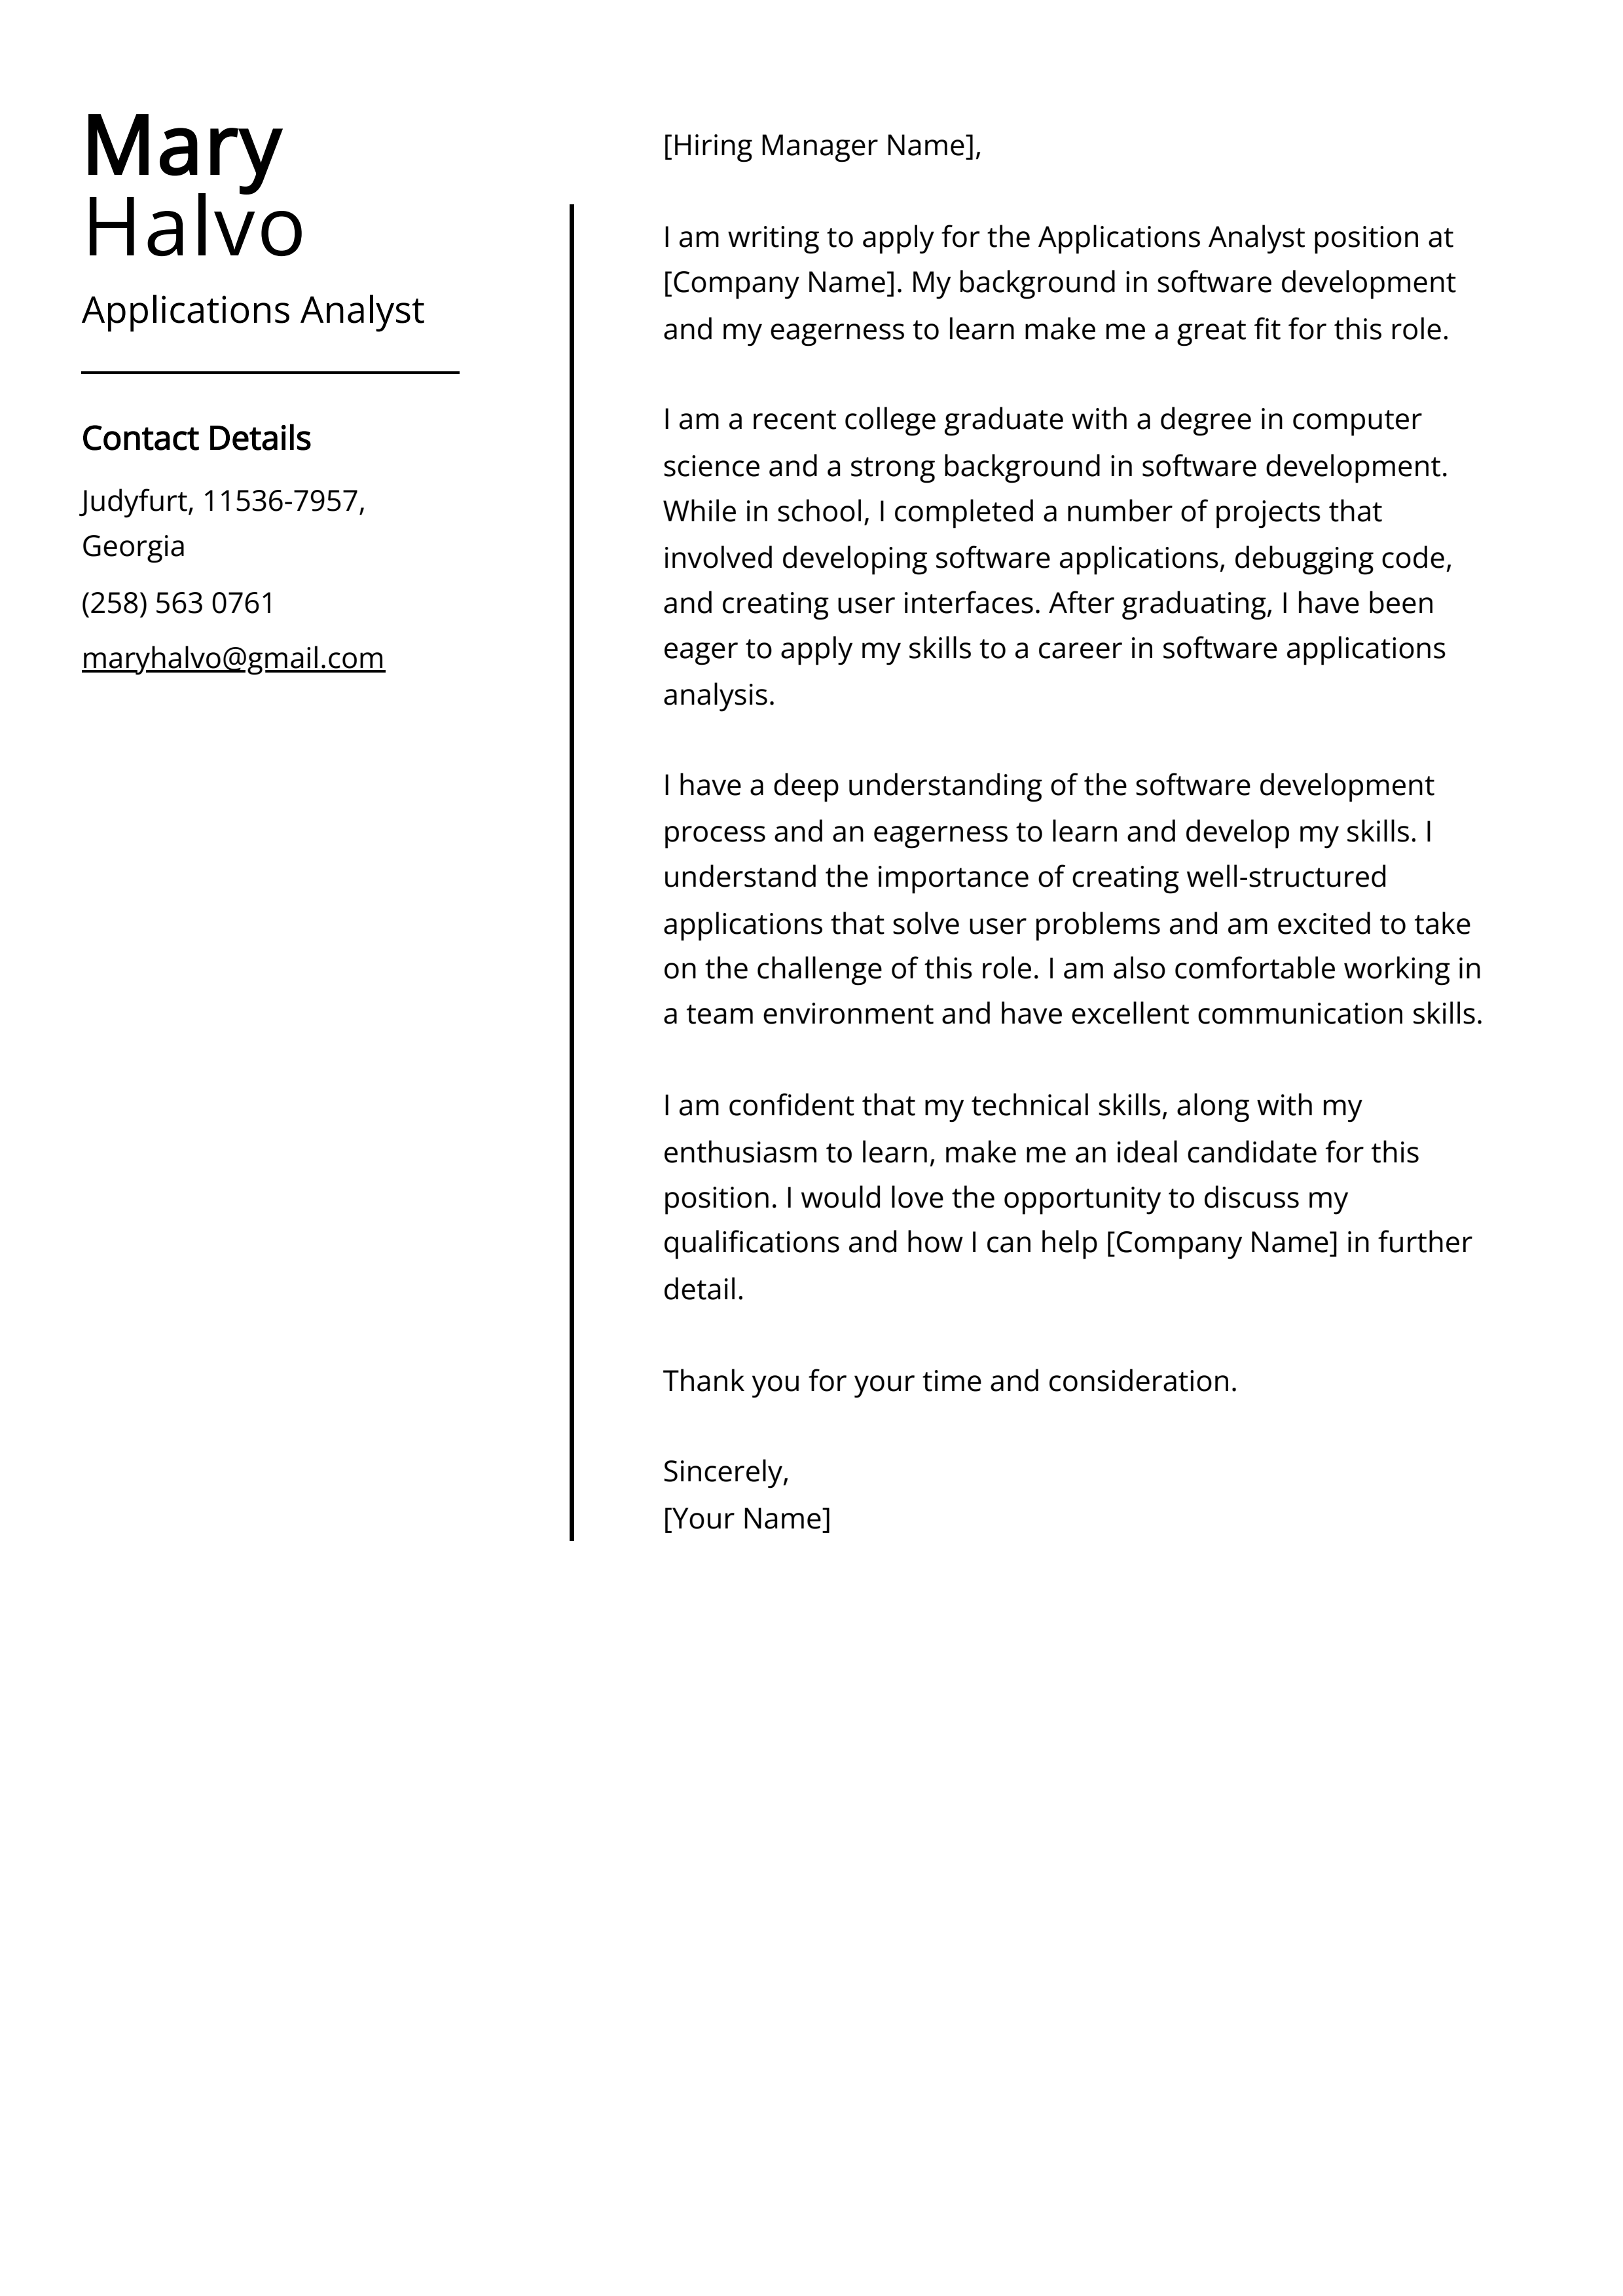 Applications Analyst Cover Letter Example